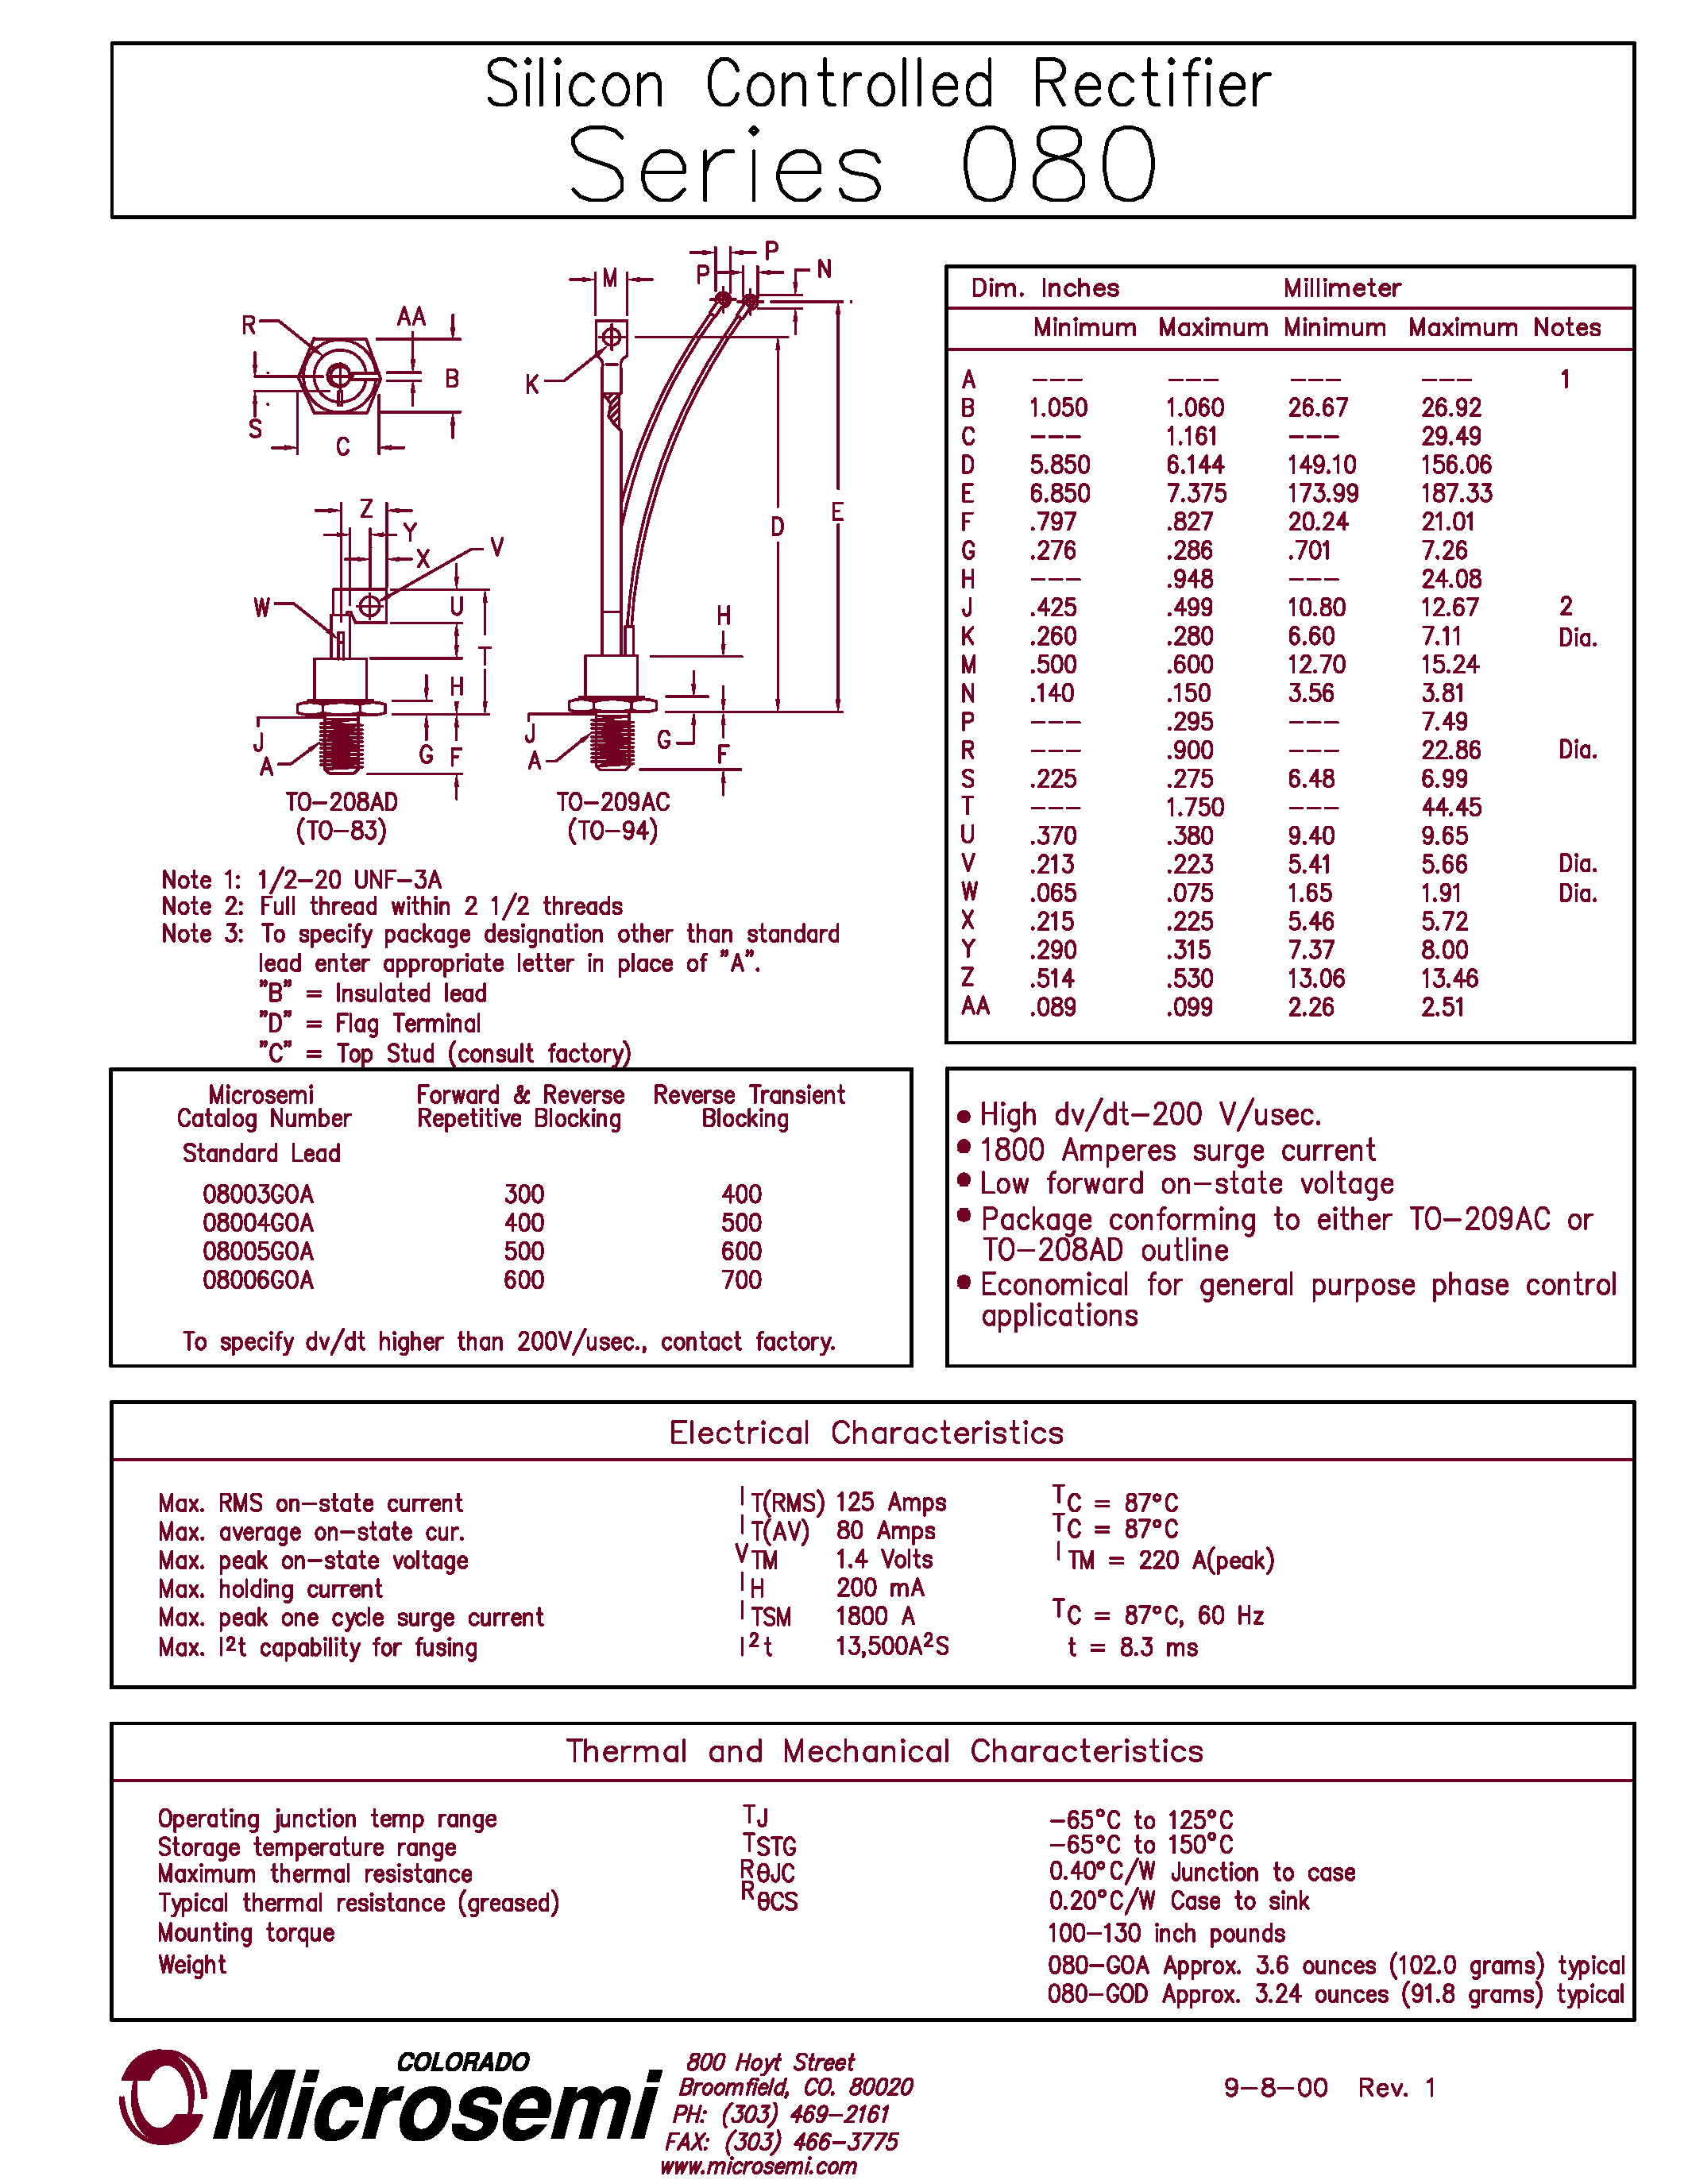 Datasheet 08004GOC - Silicon Controlled Rectifier page 1